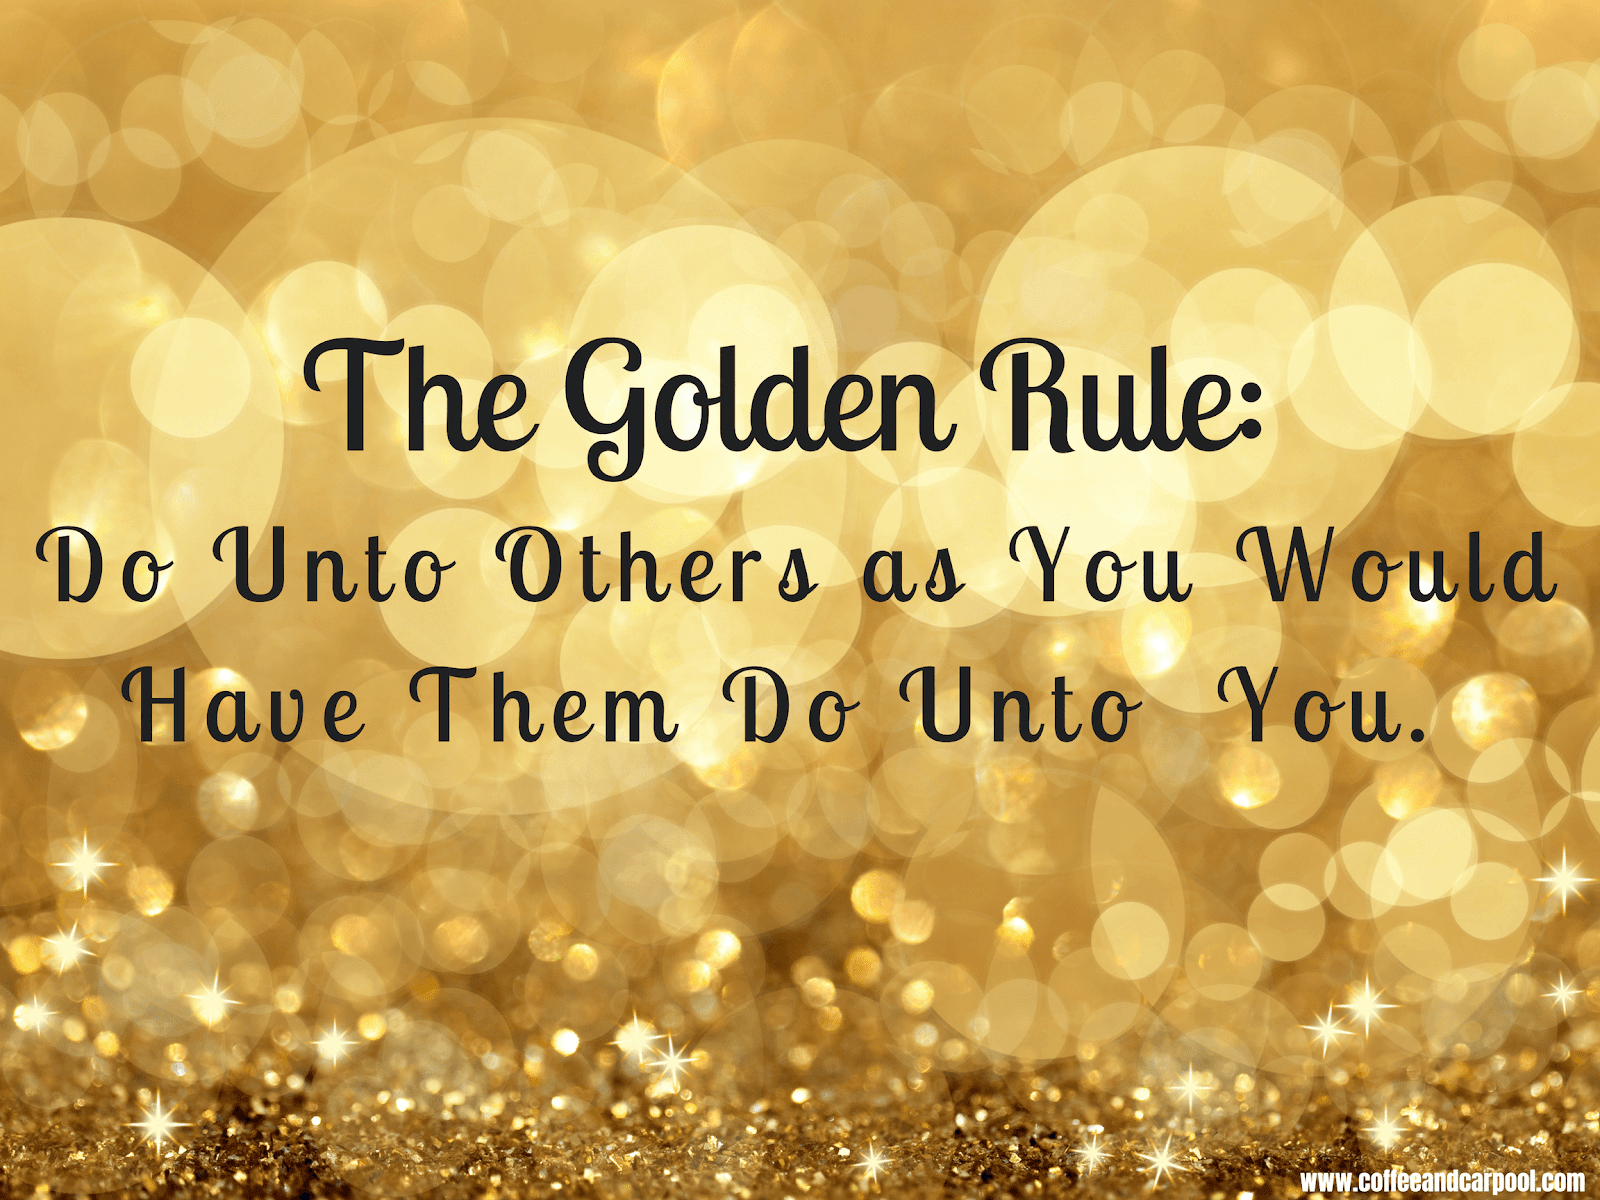 Gold with “The Golden Rule"